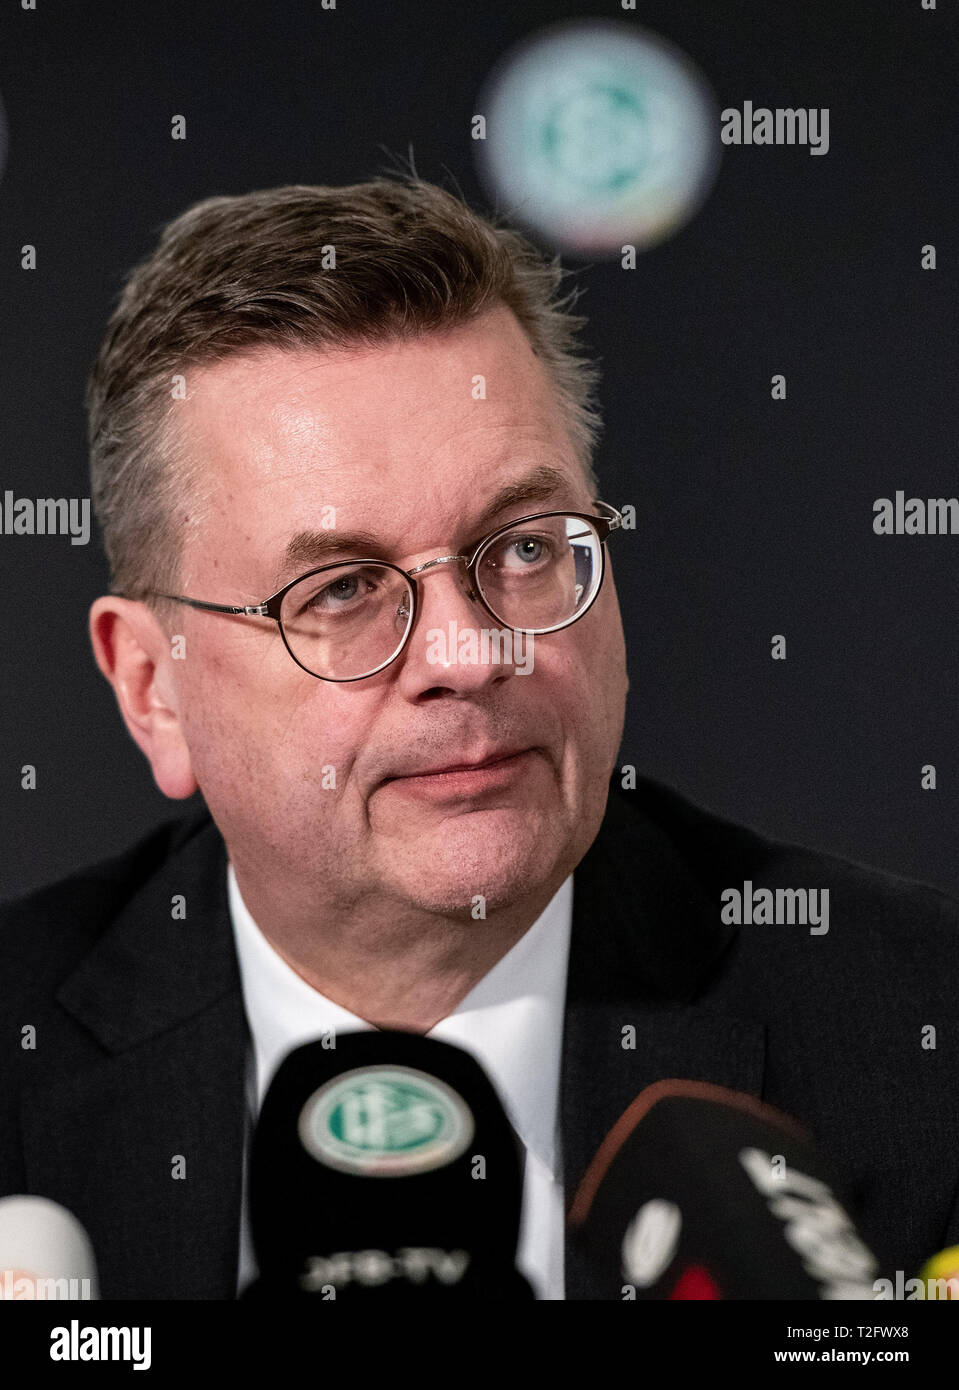 Frankfurt, Germany. 2nd Apr, 2019. President of the German Football Association (DFB) Reinhard Grindel delivers a statement during a press conference at the headquarters of DFB in Frankfurt, Germany, on April 2, 2019. Reinhard Grindel has resigned after allegations of undeclared earnings, the DFB have confirmed in an official statement on Tuesday. Credit: Florian Ulrich/Xinhua/Alamy Live News Stock Photo